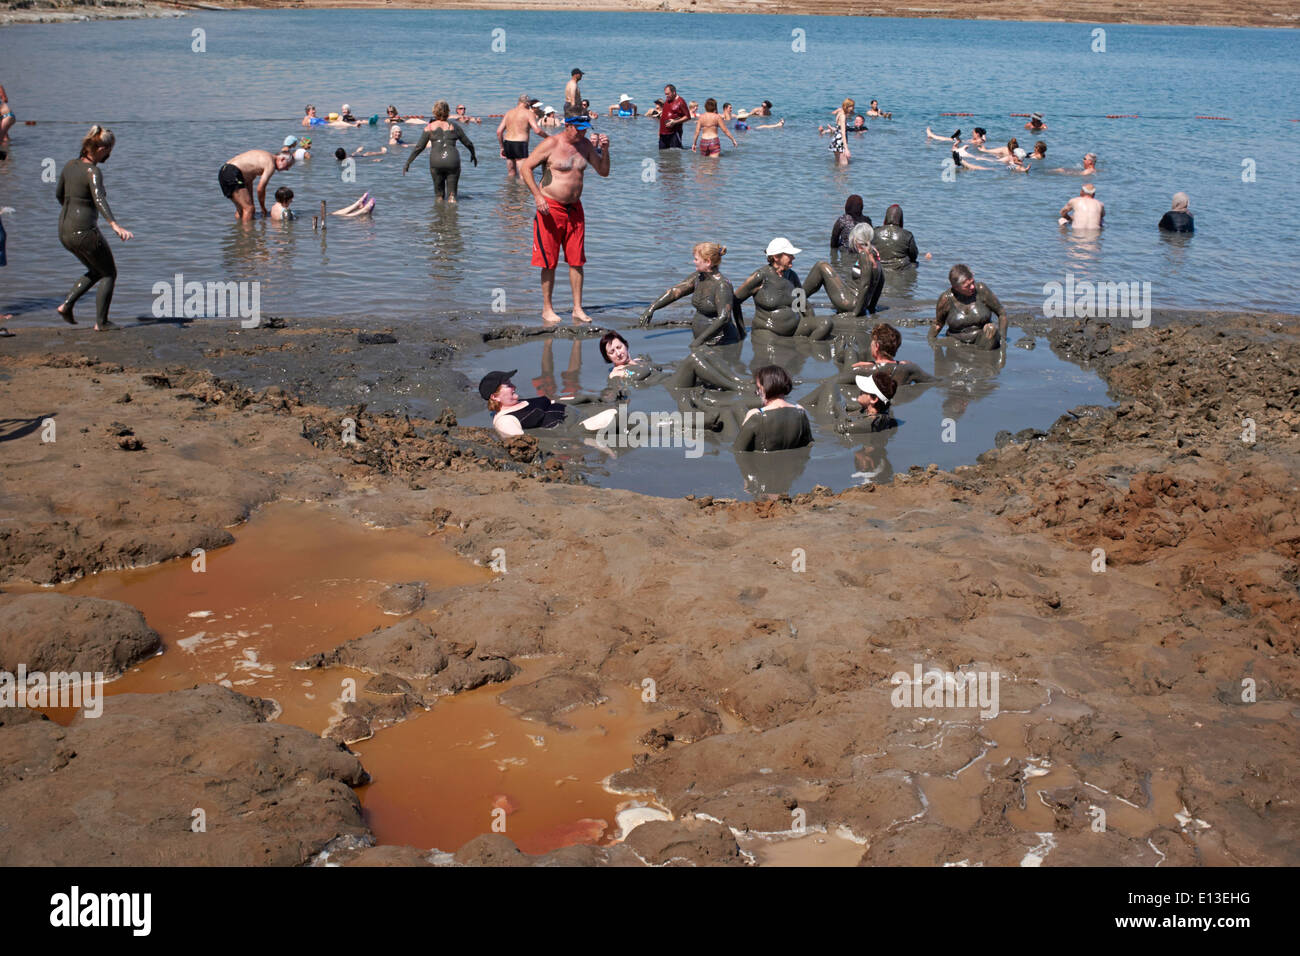 People bathing in the mud in the Dead Sea, Israel Stock Photo